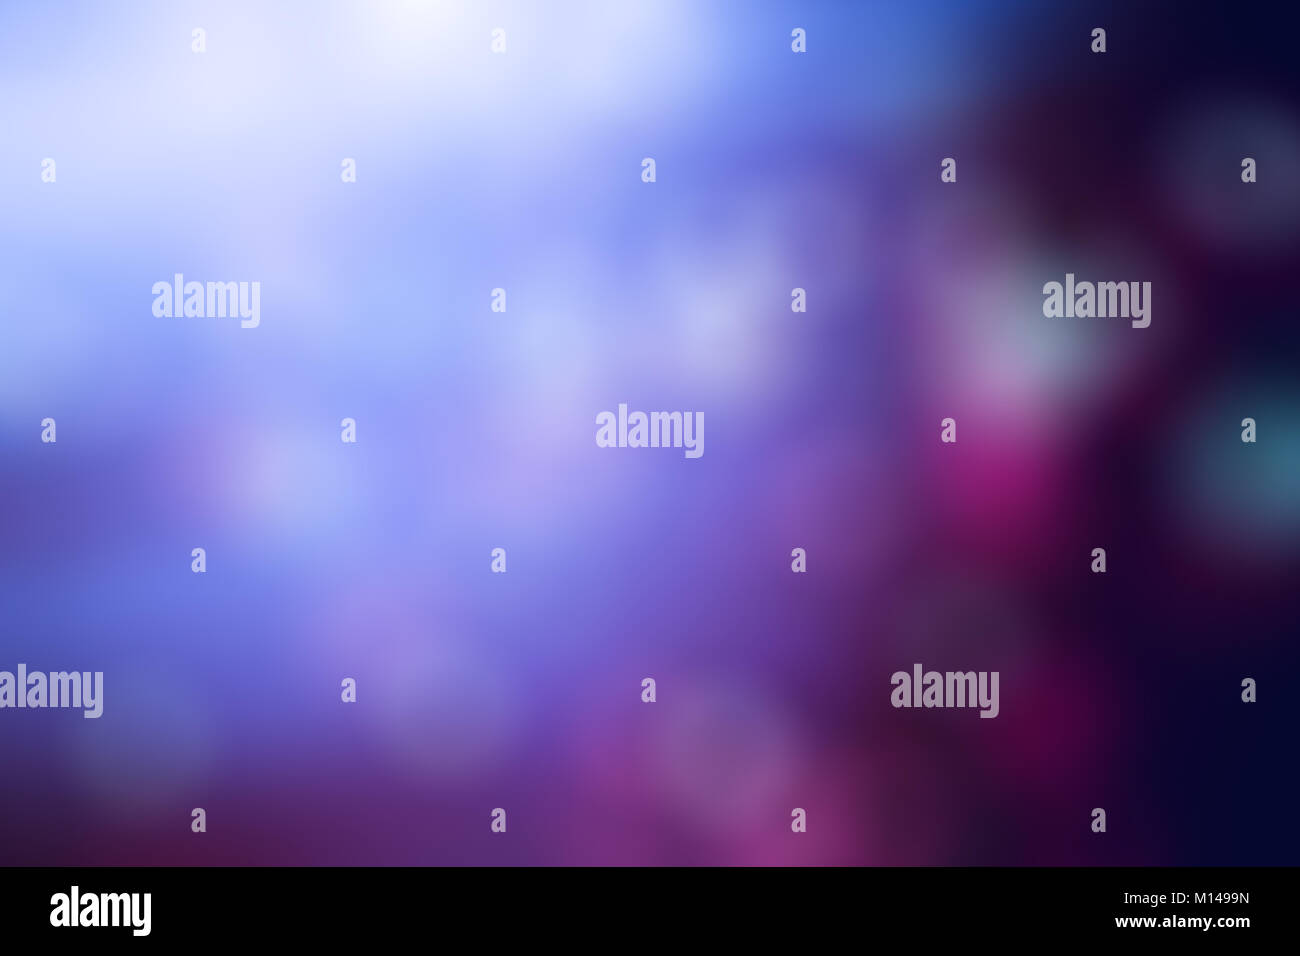 Blue purple abstract texture background. Bokeh, gradient from light blue to dark blue Stock Photo